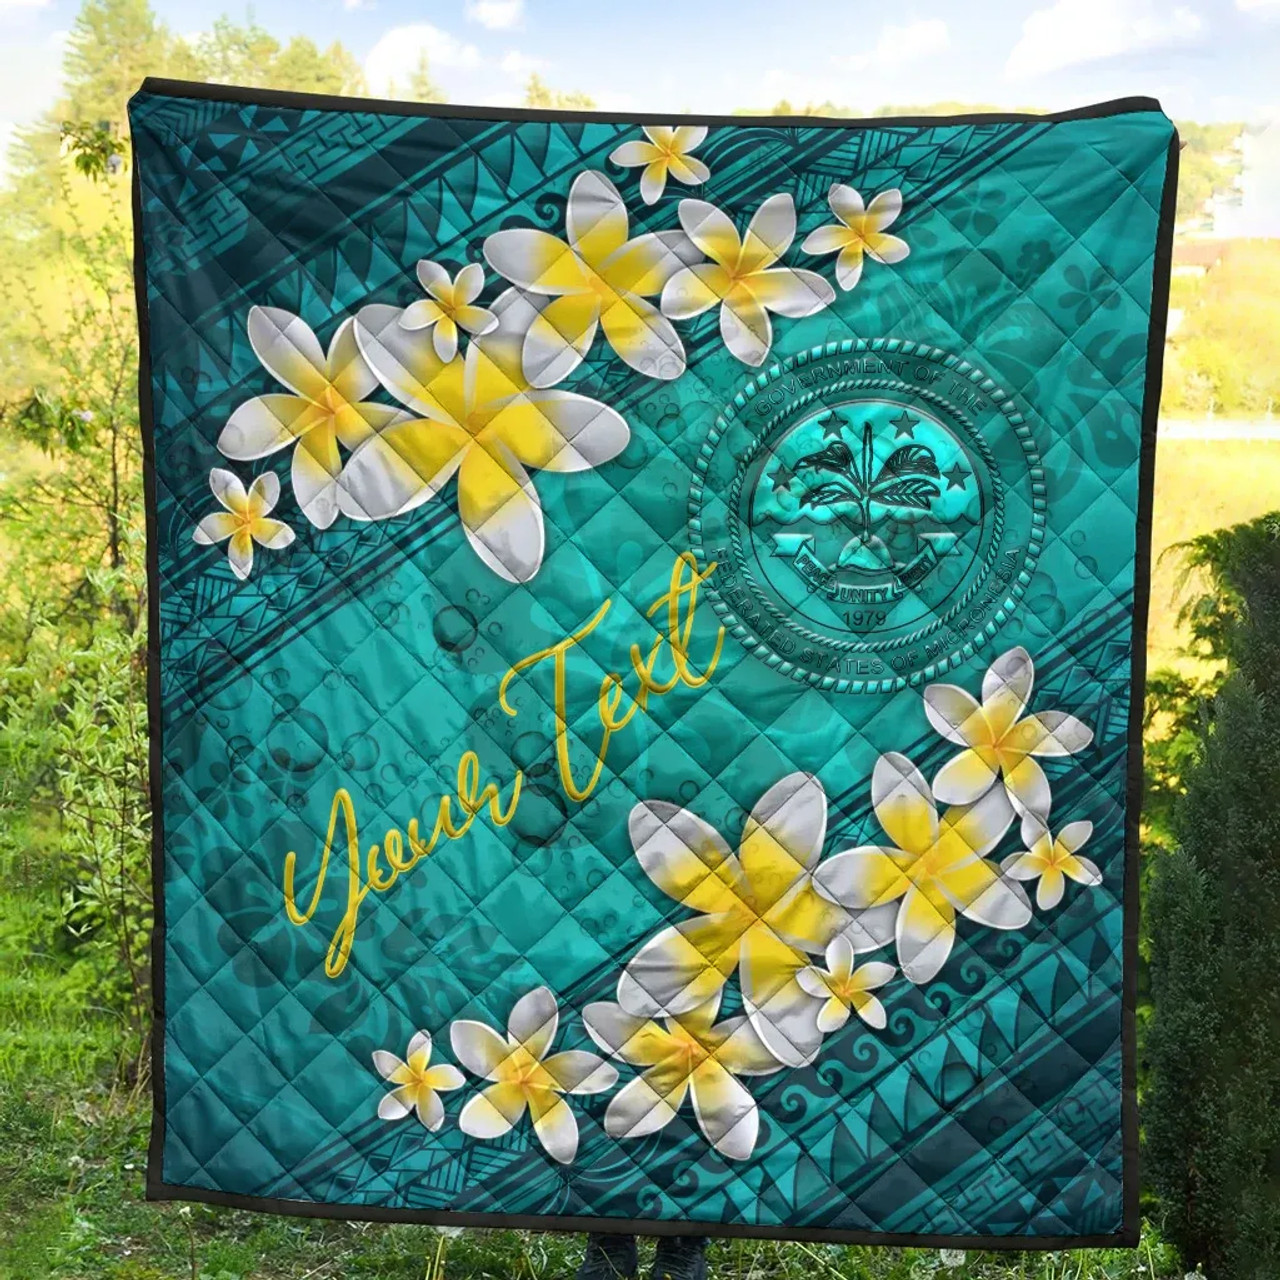 Federated States Of Micronesia Polynesian Custom Personalised Quilt - Plumeria With Blue Ocean 5